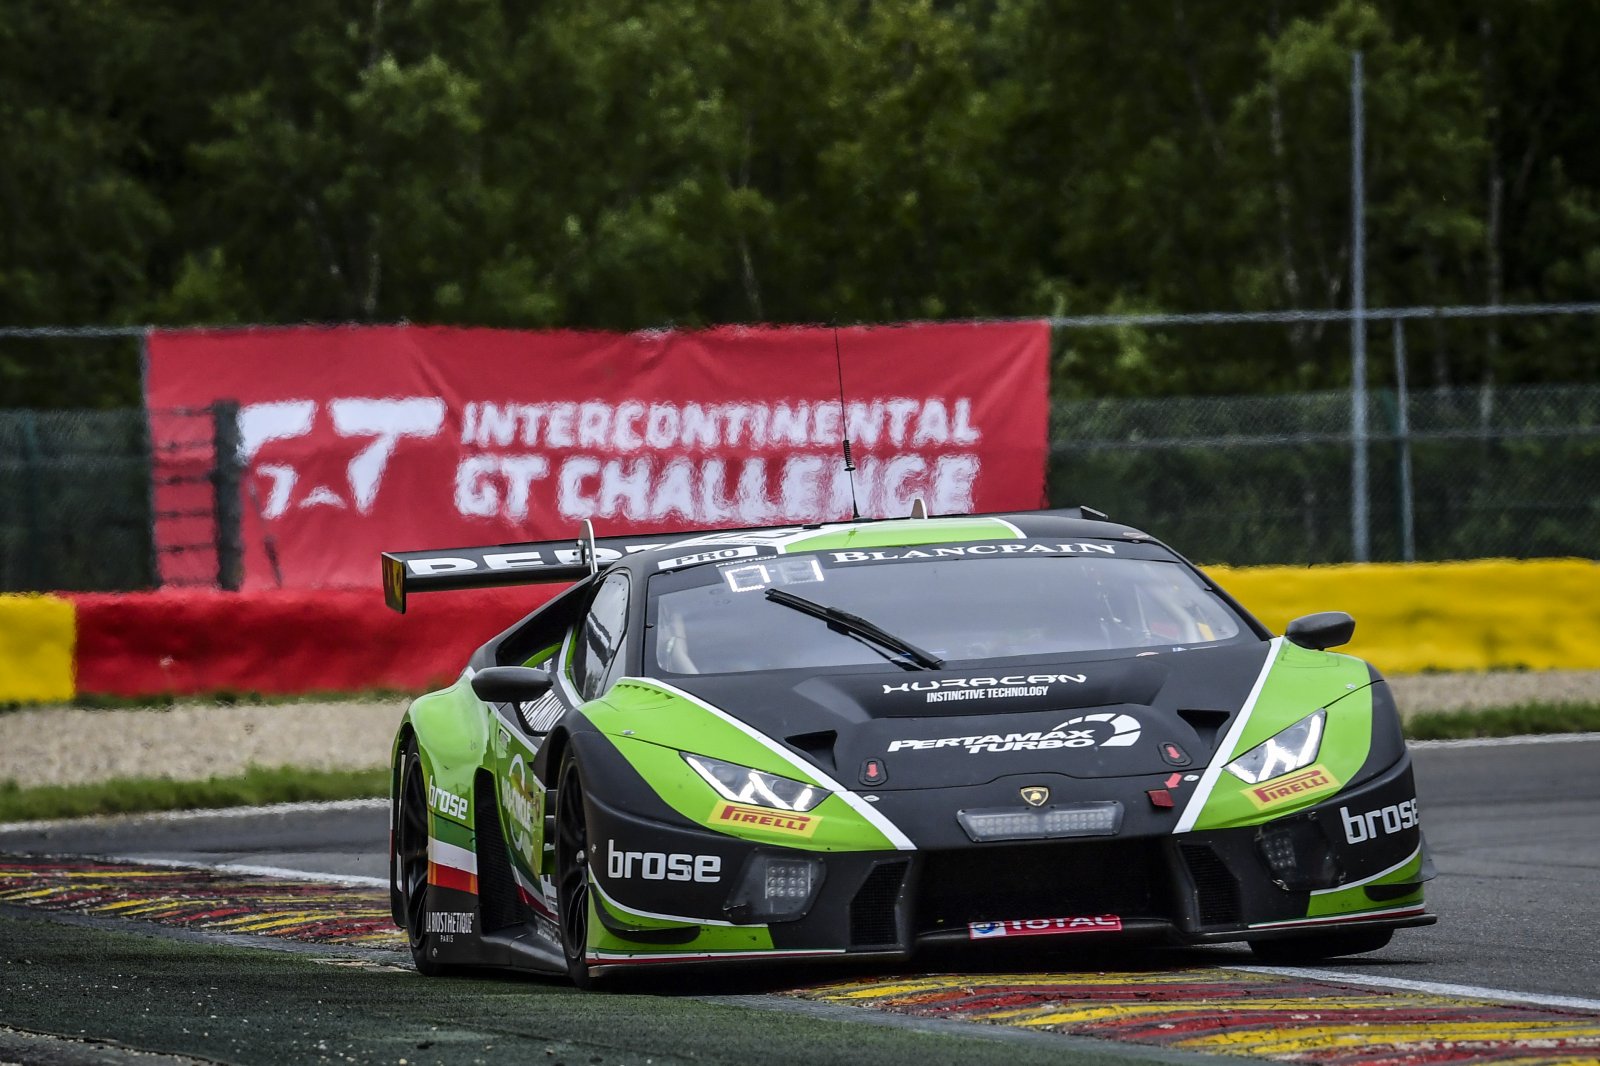 Mixed conditions during Free Practice, Lamborghini on top